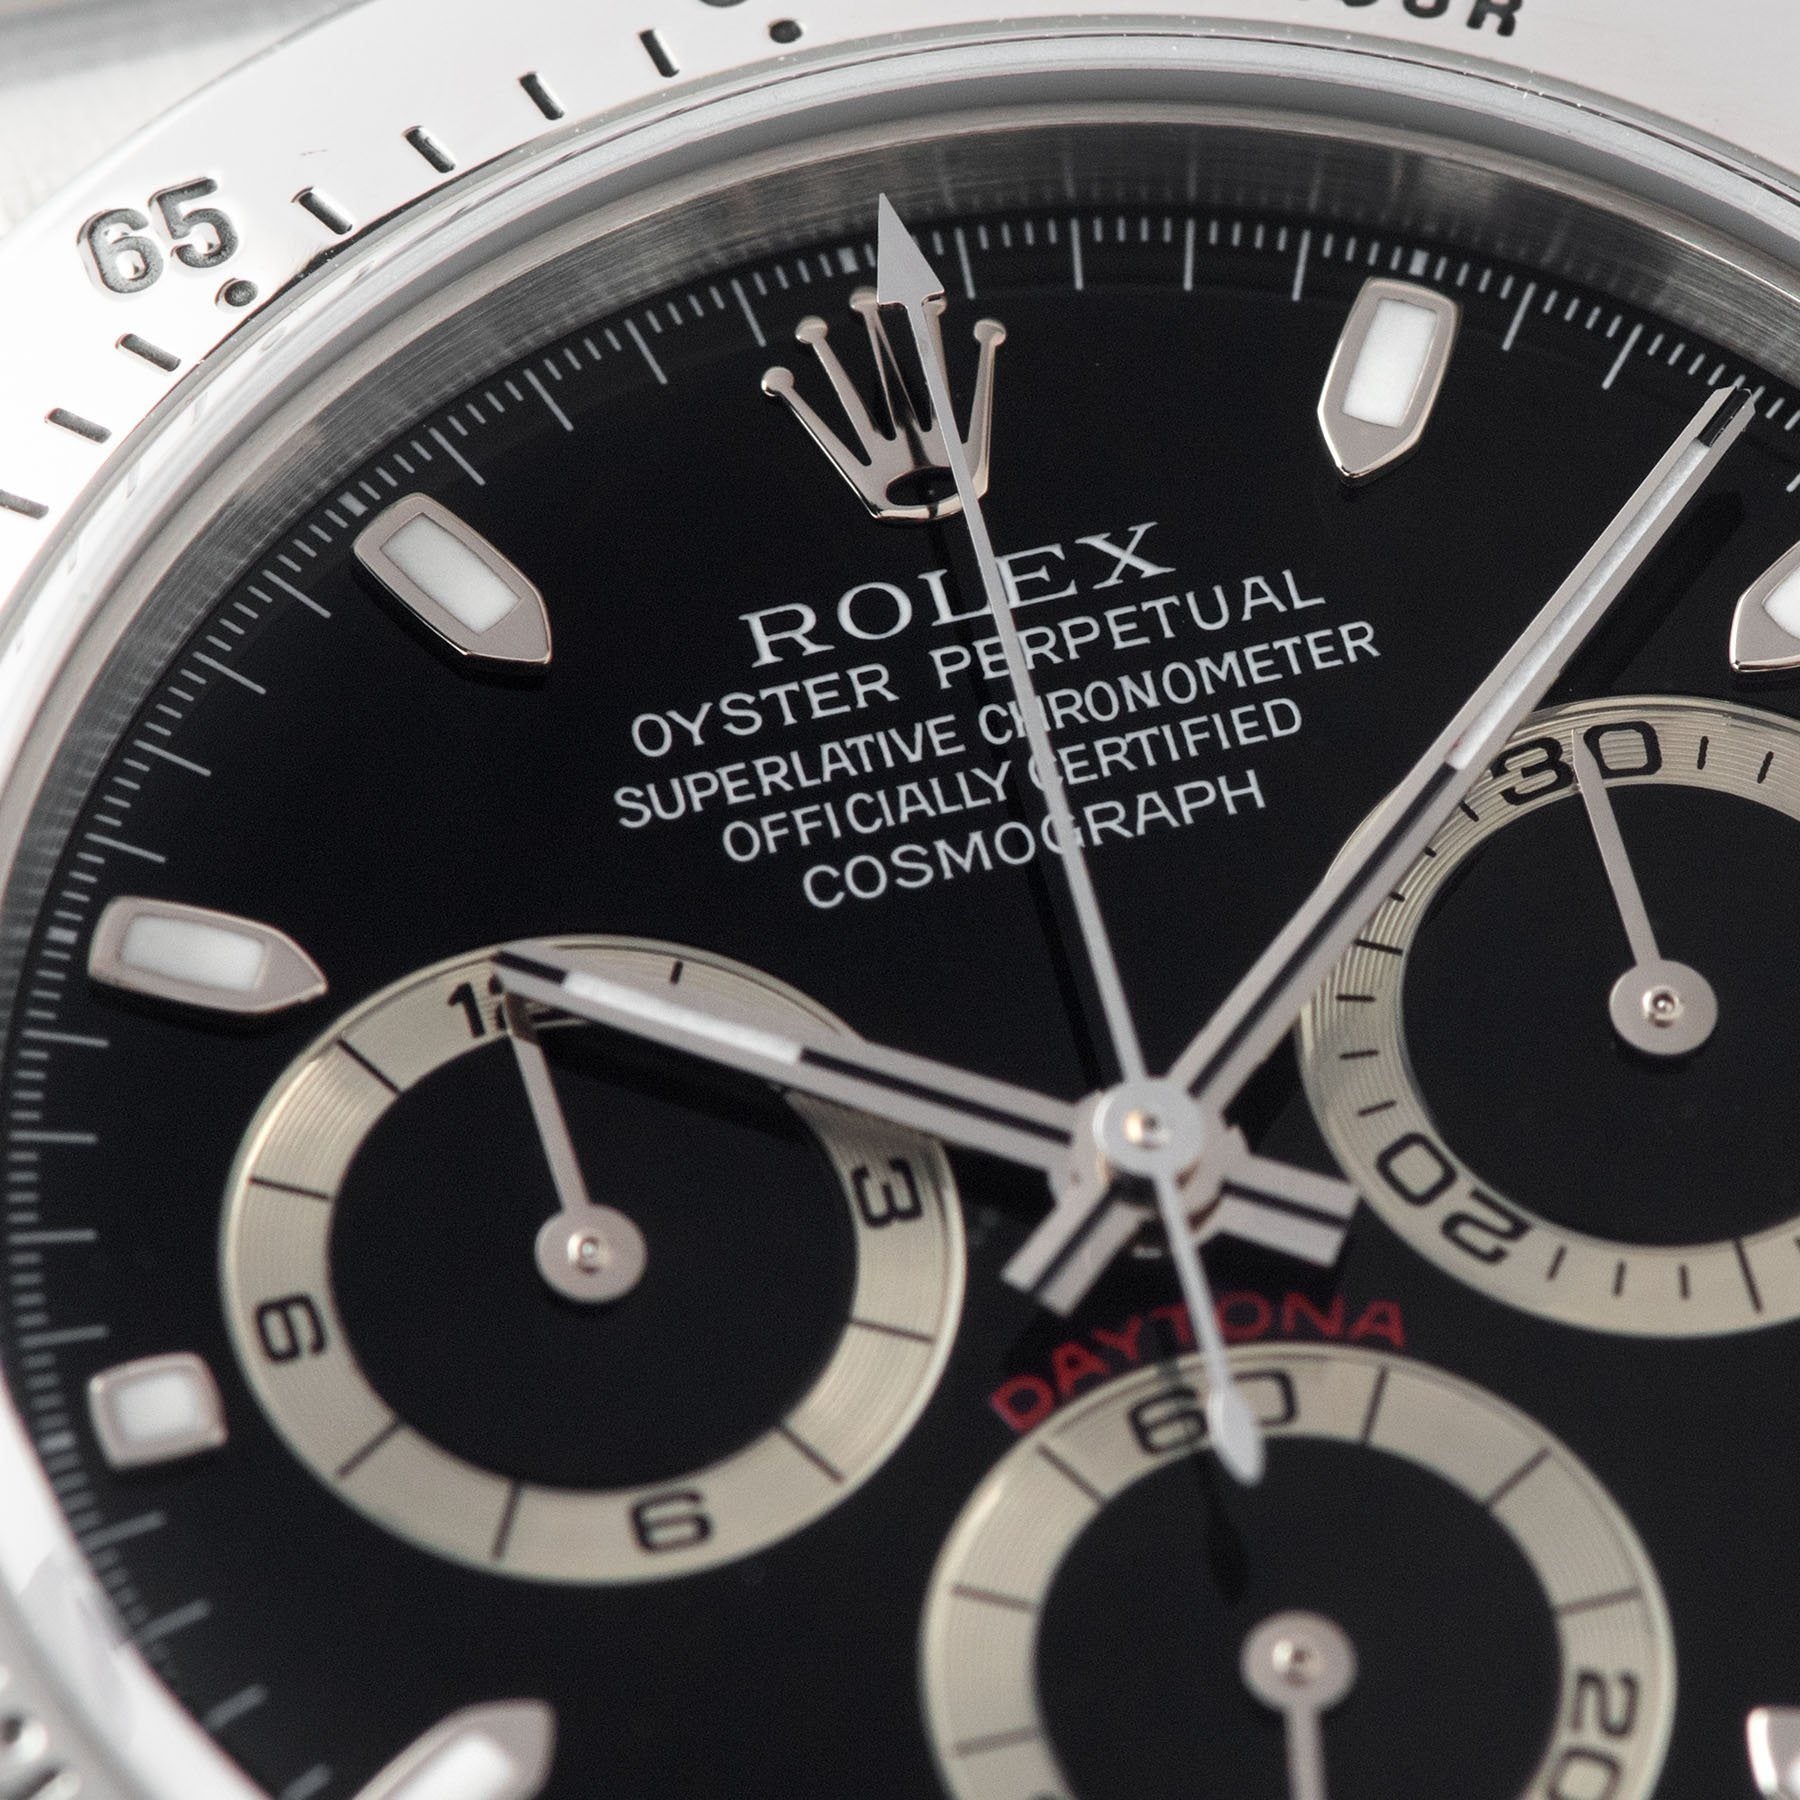 Rolex Daytona Steel 116520 Black Dial Box and Papers set  dial detail